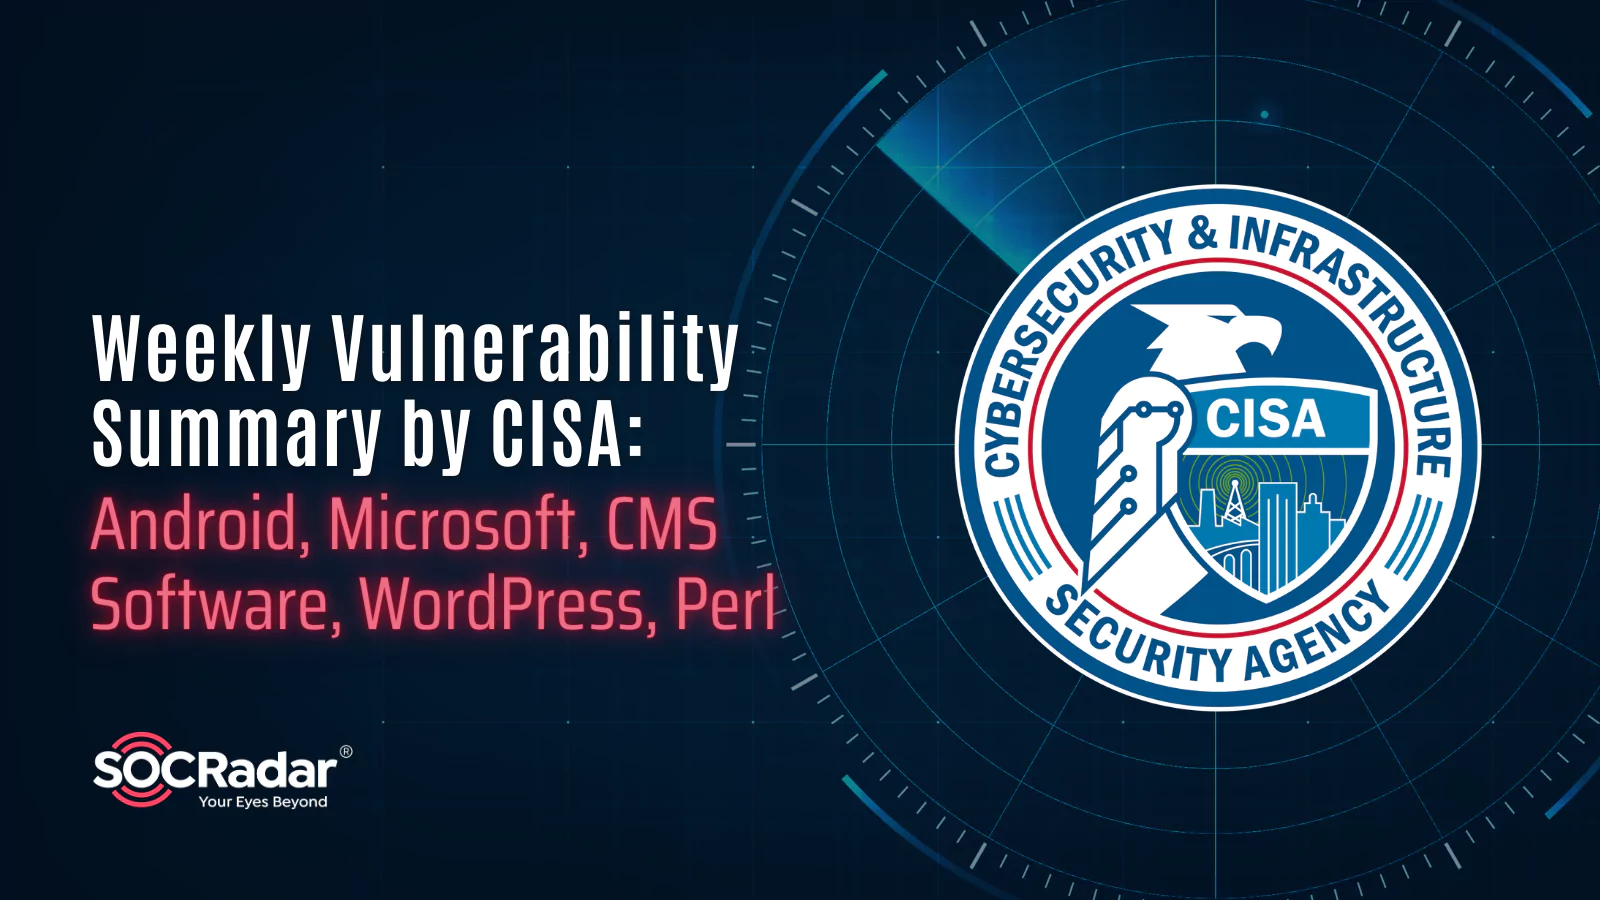 SOCRadar® Cyber Intelligence Inc. | Weekly Vulnerability Summary by CISA: Android, Microsoft, CMS Software, WordPress, Perl, and More